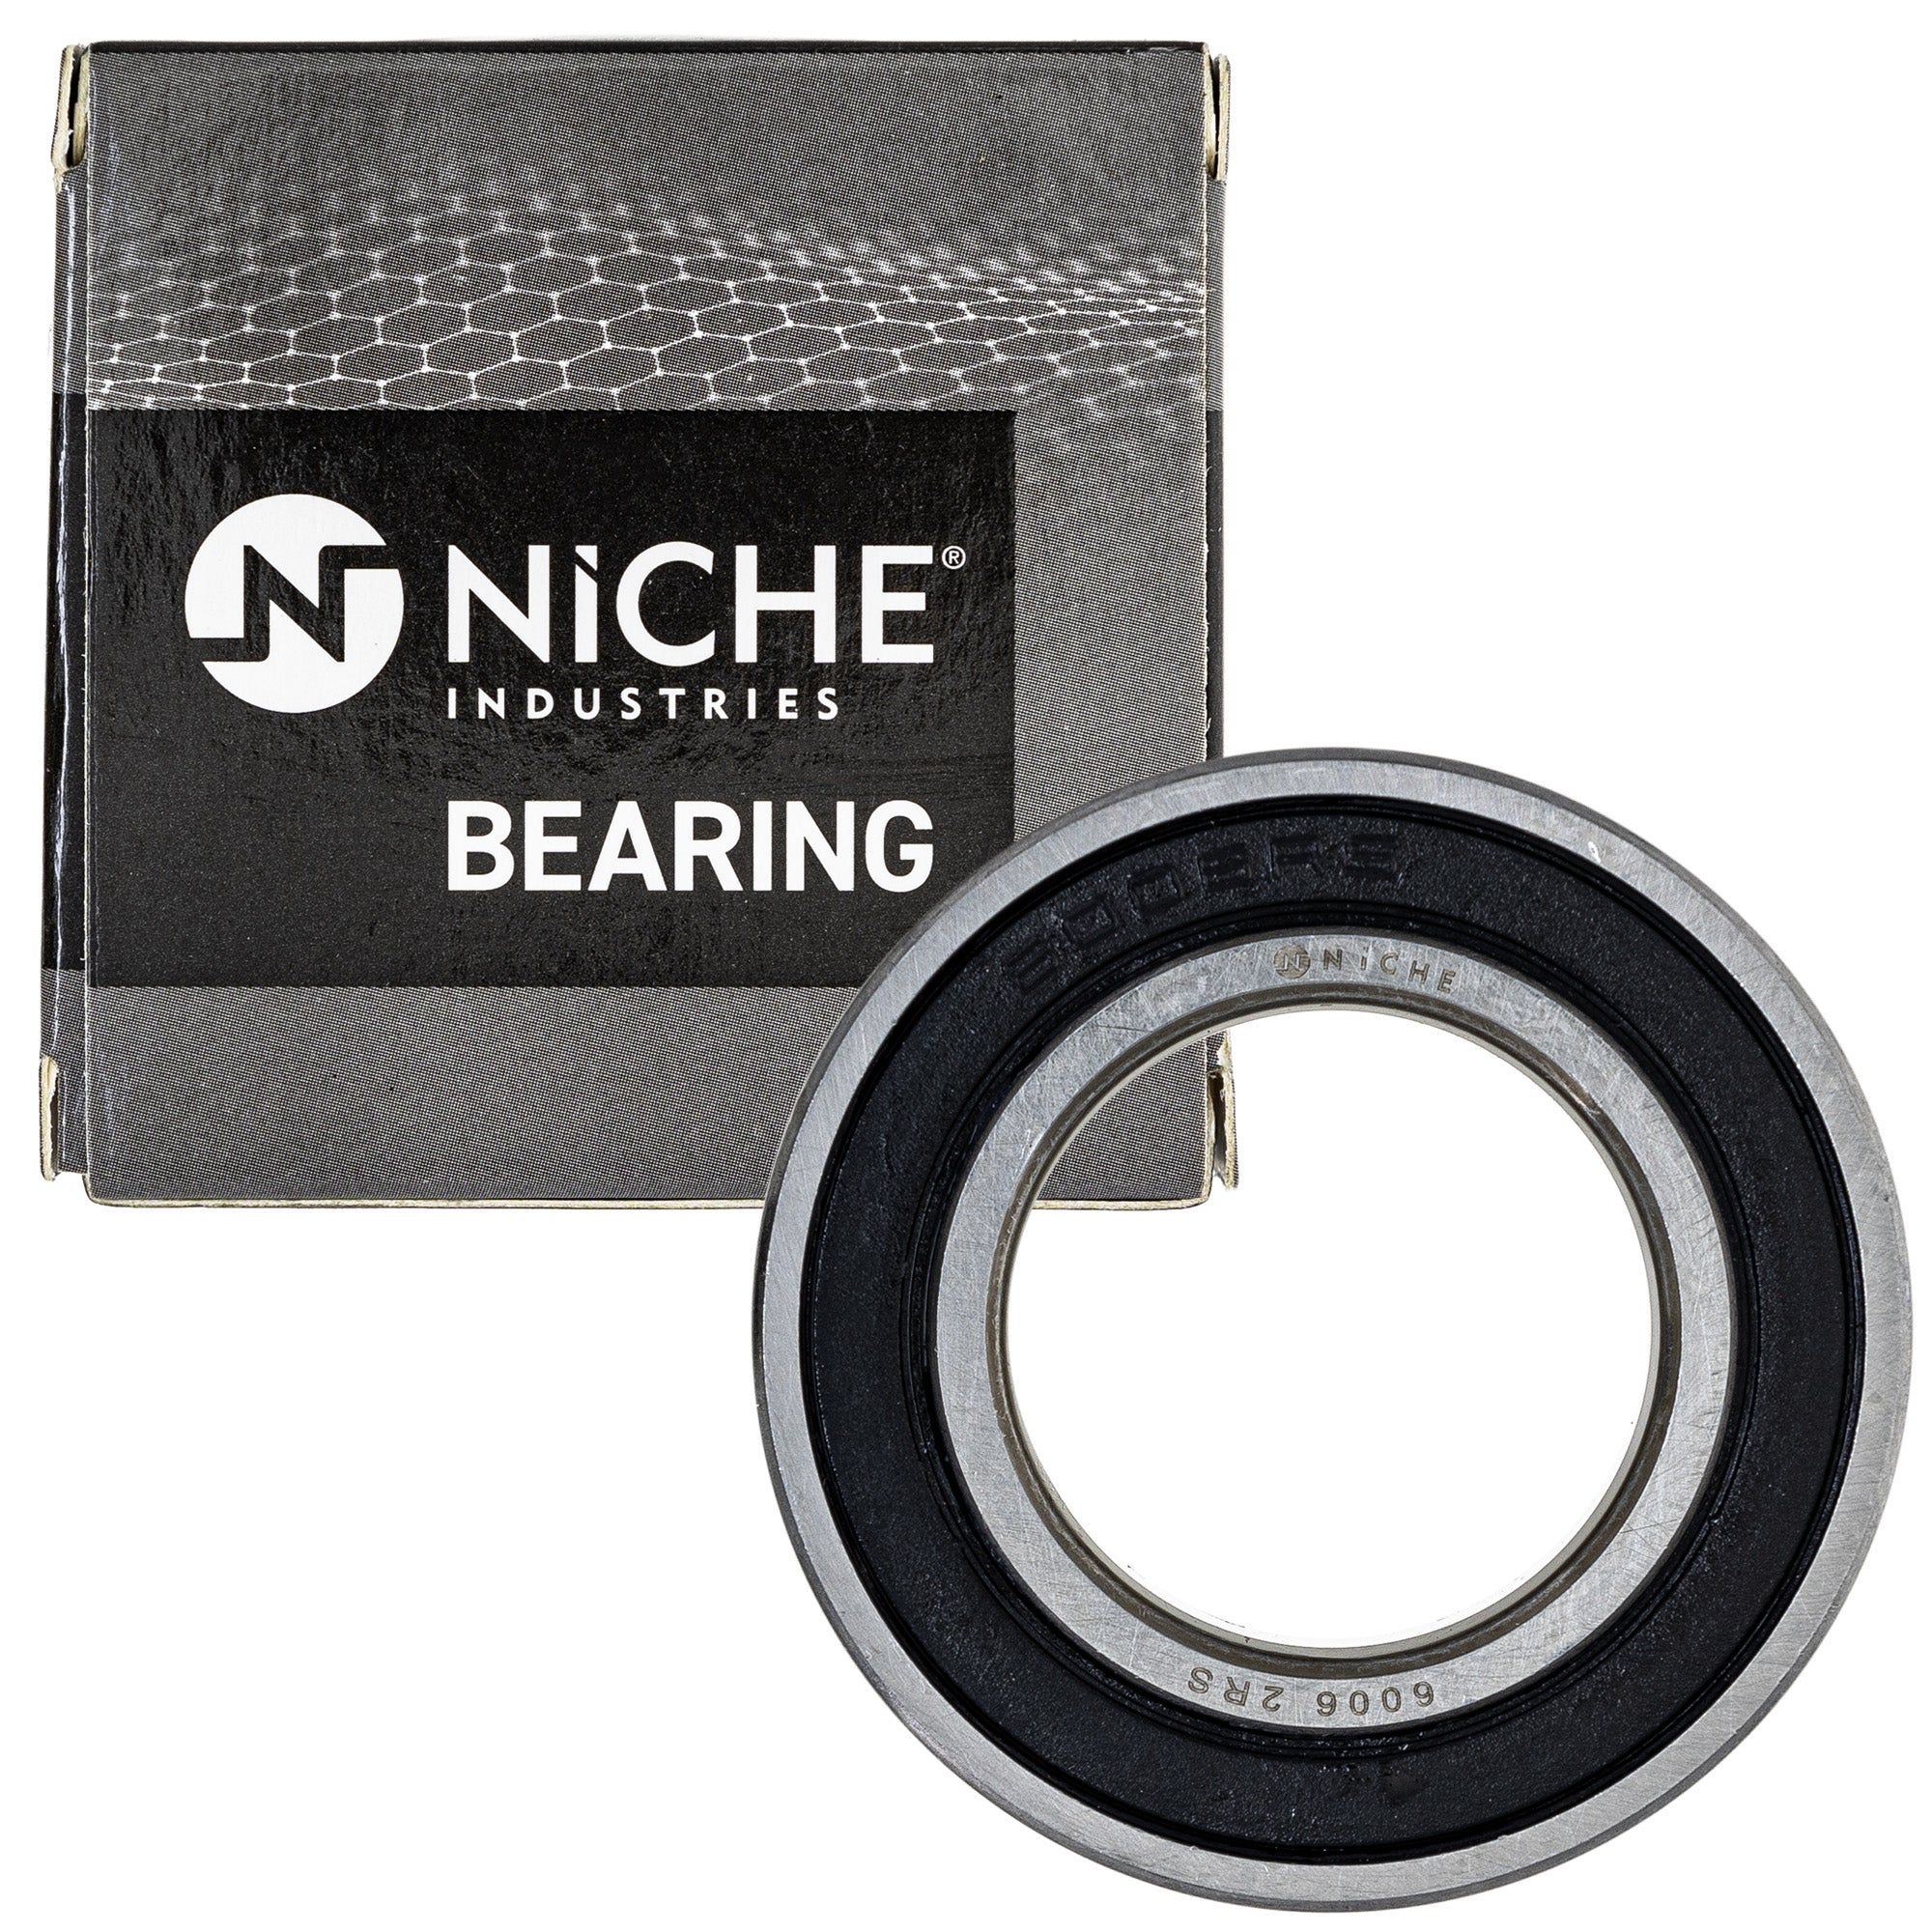 NICHE MK1009166 Wheel Bearing Seal Kit for zOTHER Grizzly